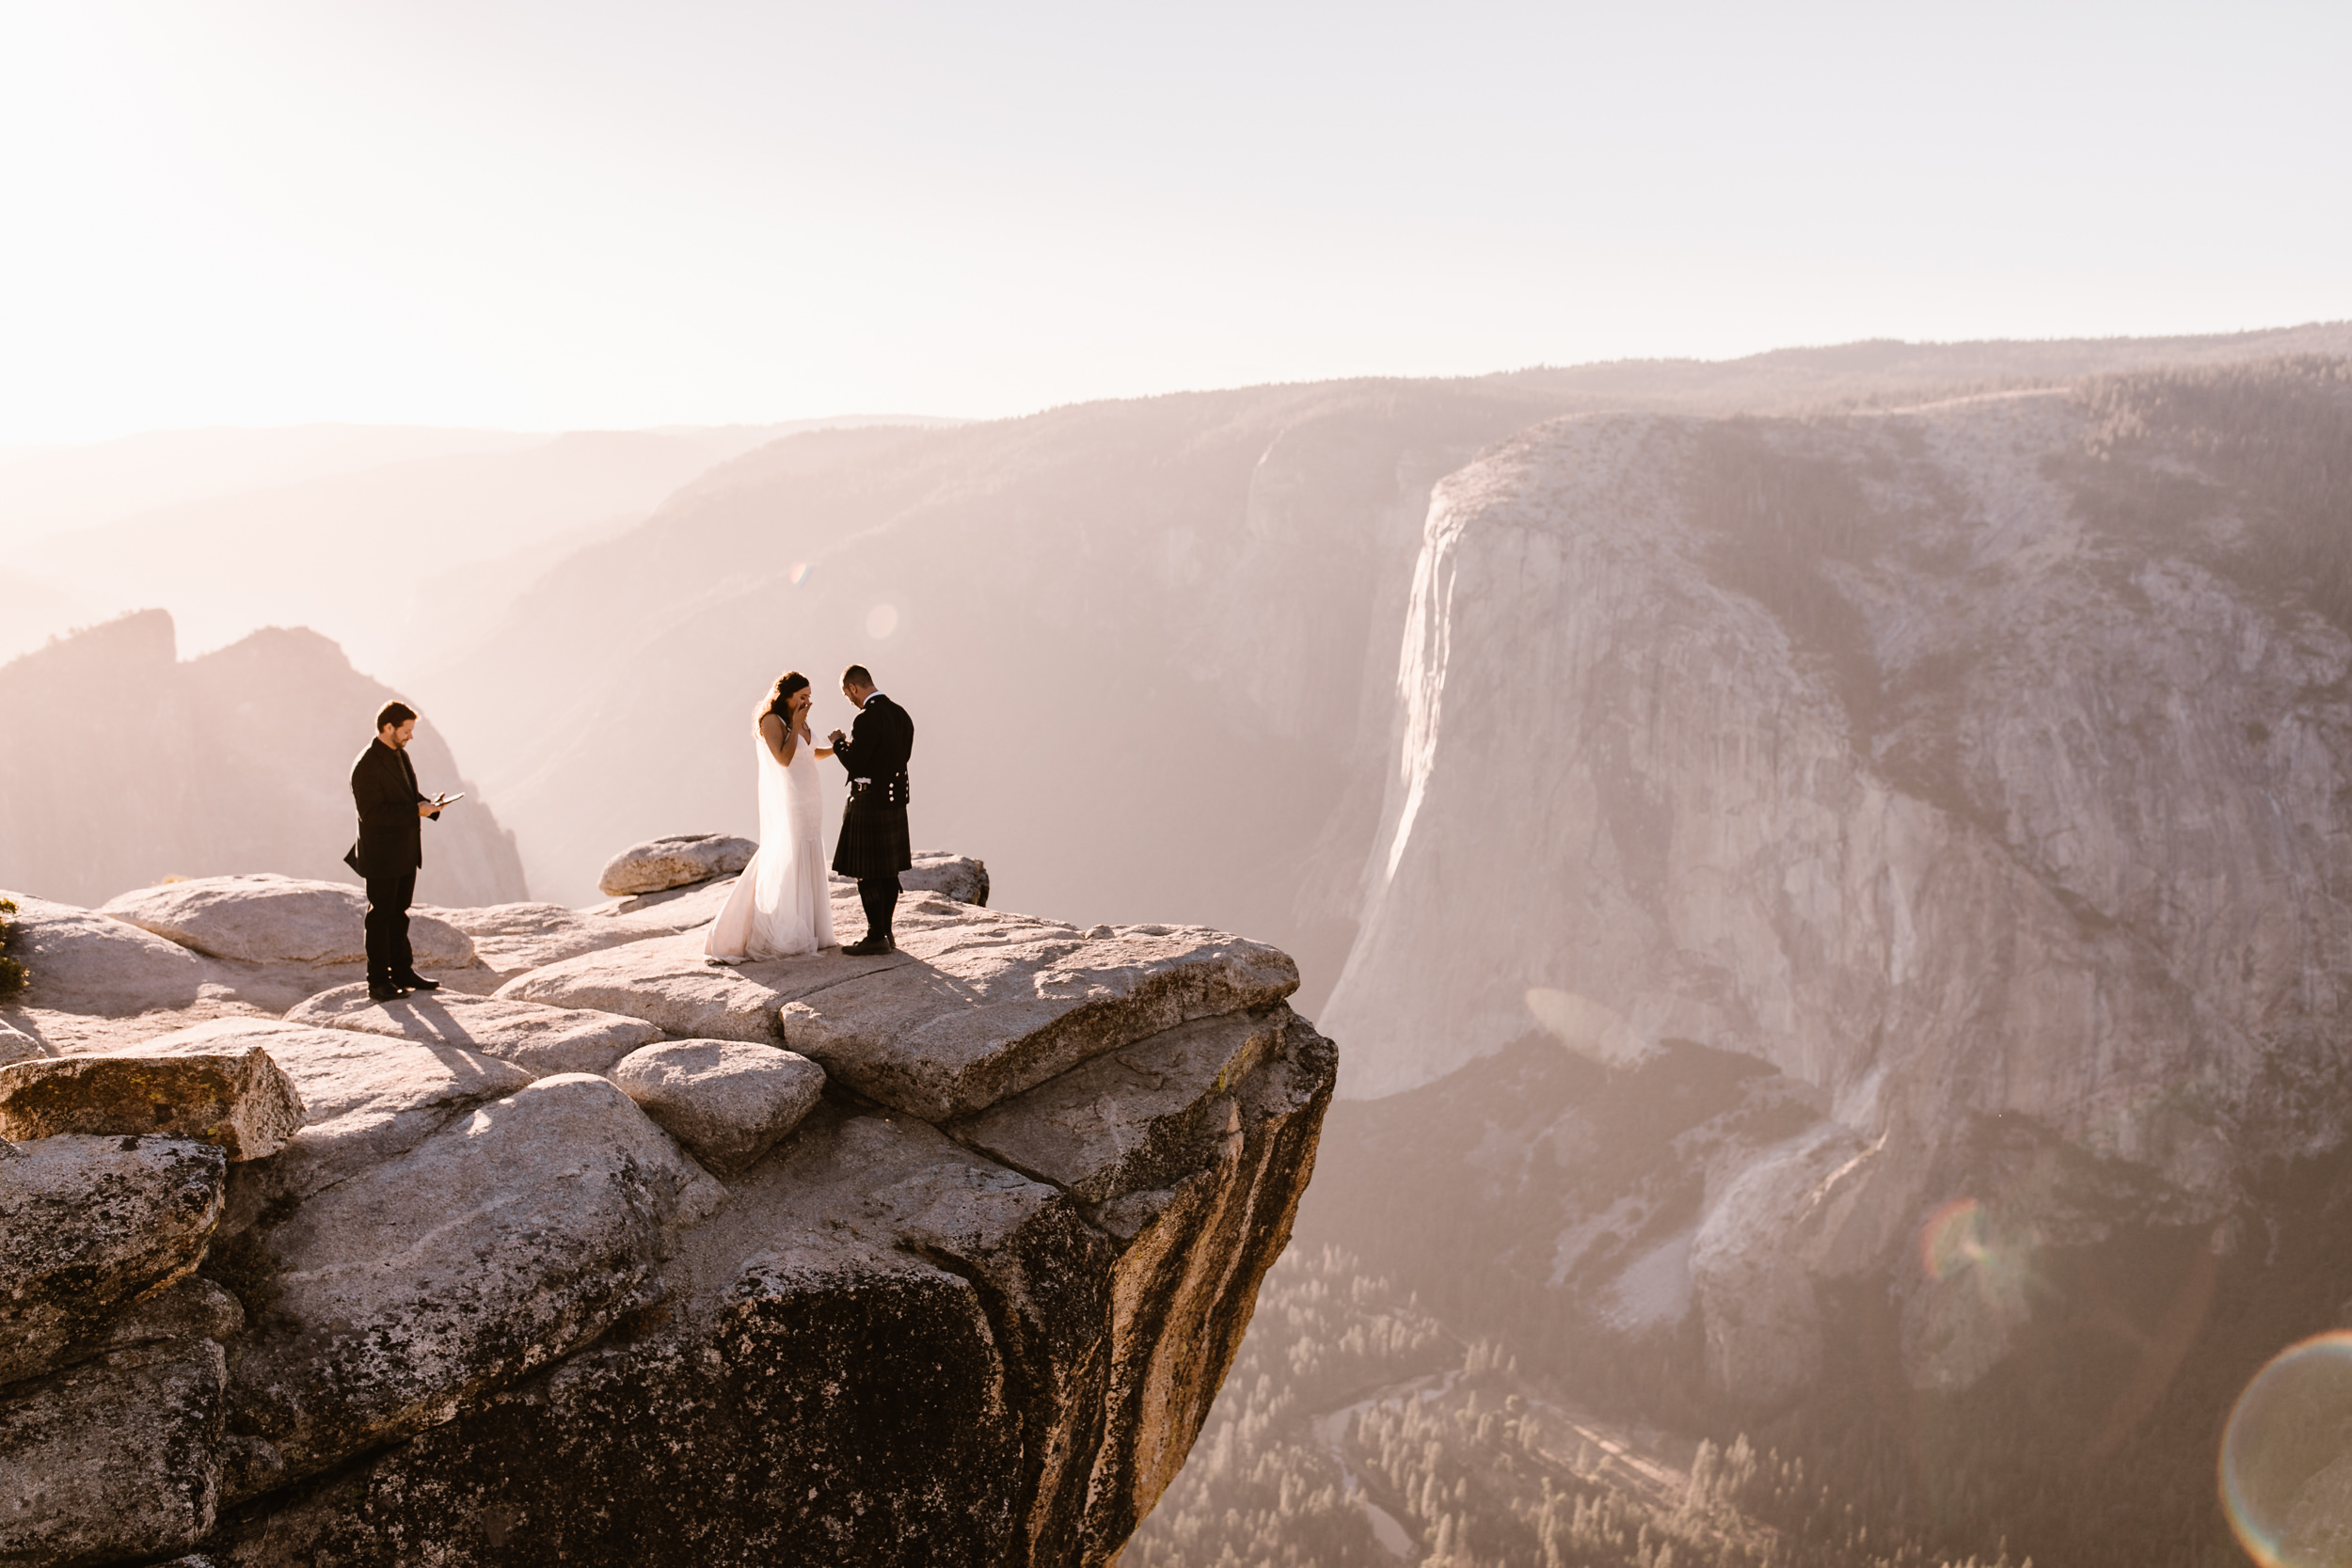 destination elopement in yosemite national park | ceremony + portraits at taft point | groom wearing a kilt + bride wearing boots | the hearnes elopement photography